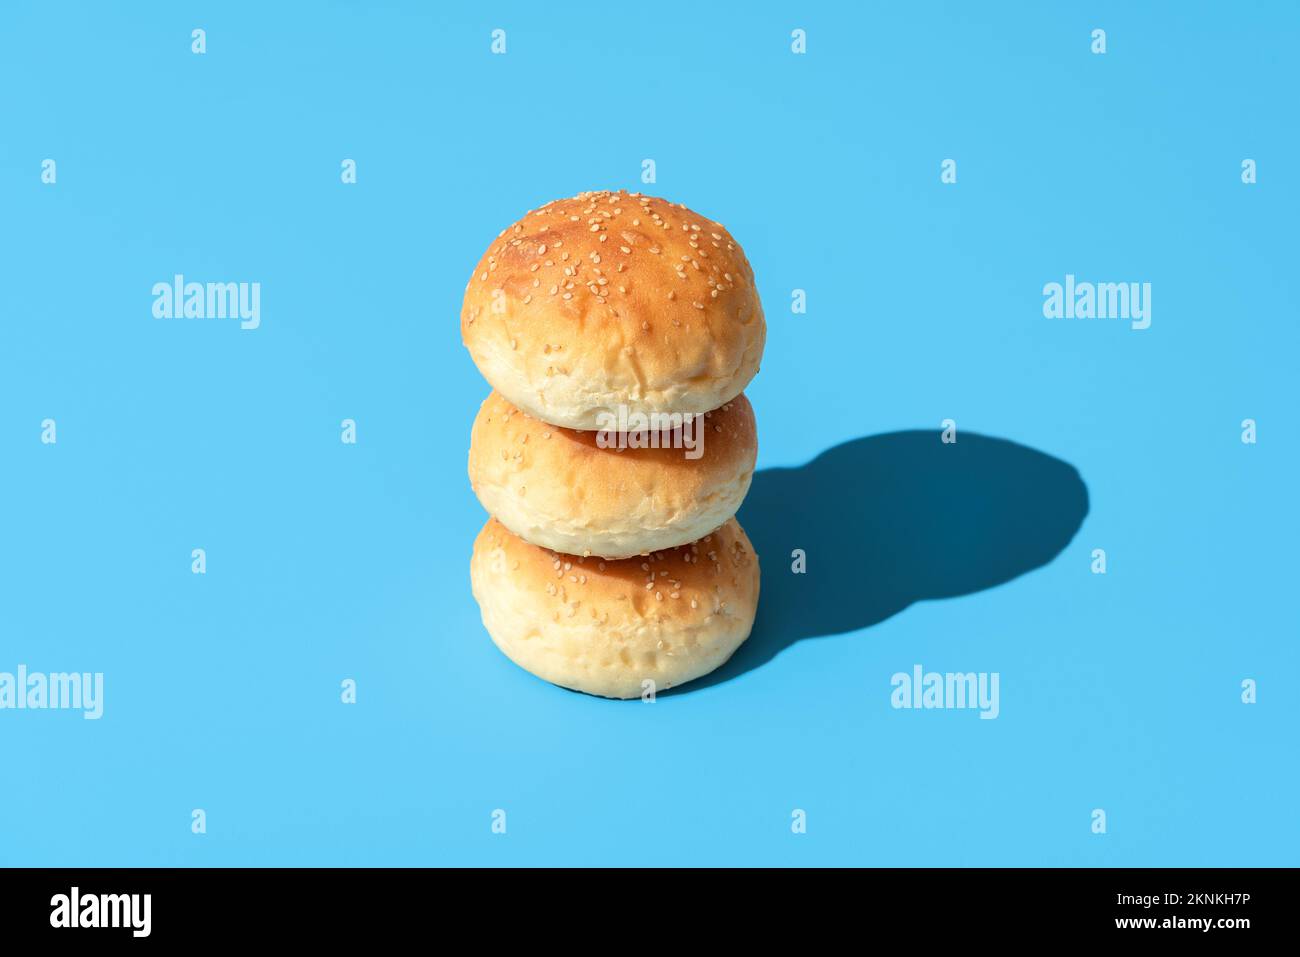 Stack of bread buns on a blue-colored table. Homemade burger buns with sesame seeds minimalist on a colorful background Stock Photo